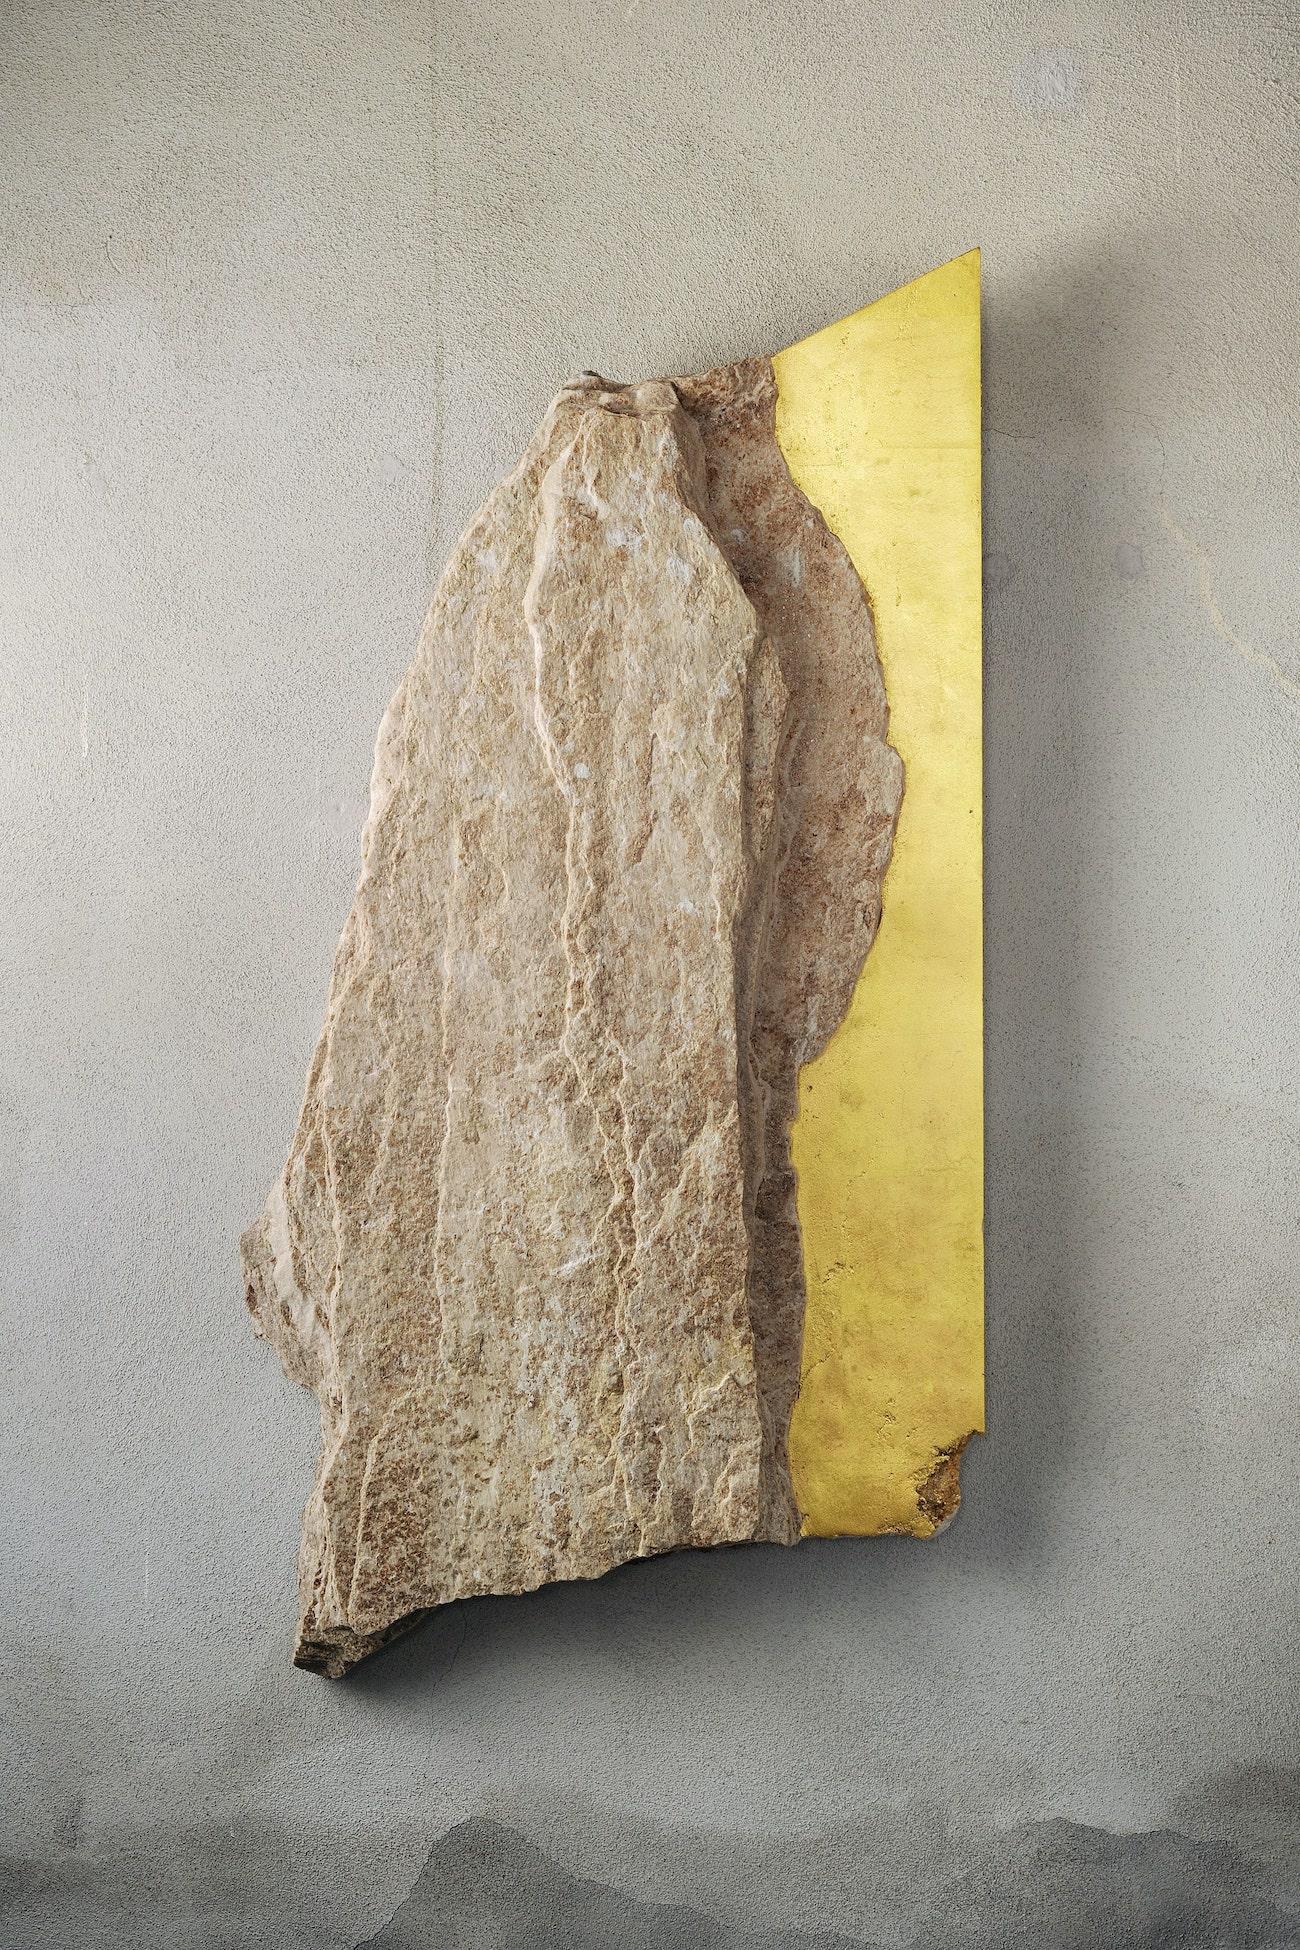 Sezione Aurea - A1, Palissandro marble and gold leaf, 82.5 cm × 43.5 cm × 4.5 cm. Unique piece.

In his contemporary sculpture, Italian artist Mattia Bosco seeks to create a synthesis between concept and form. The two combine with balance and